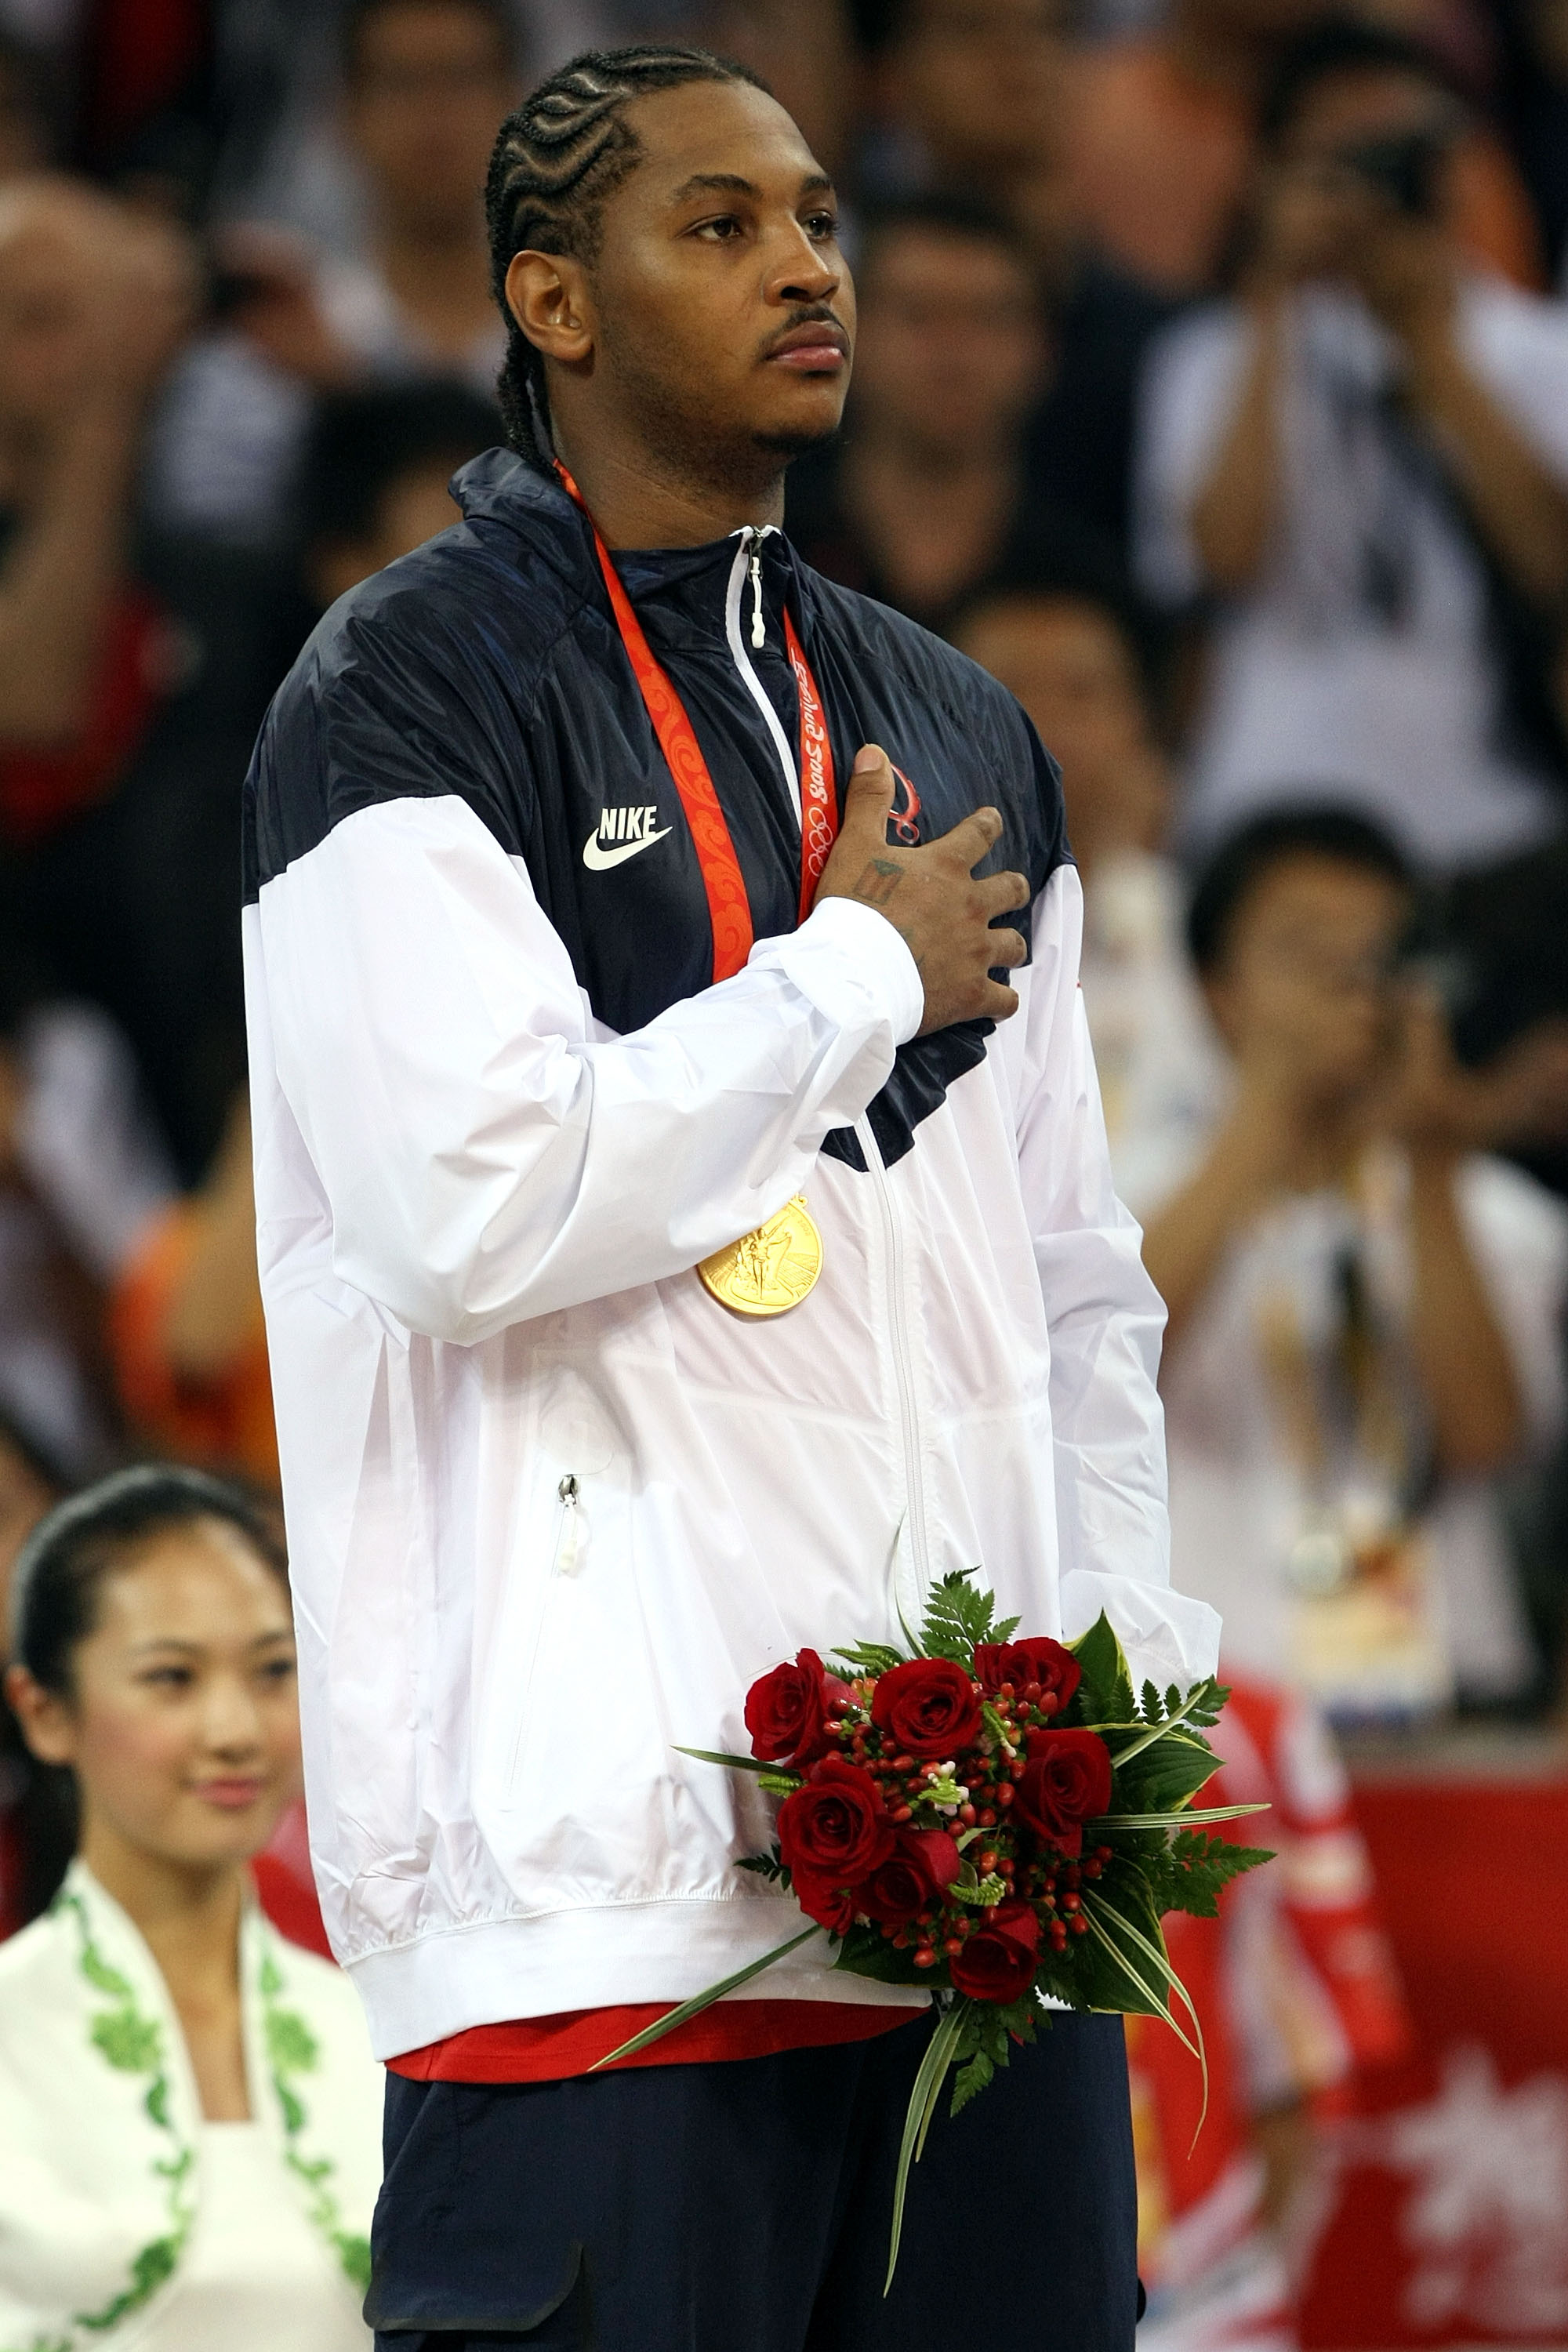 BEIJING - AUGUST 24:  Carmelo Anthony #15 of the United States salutes as his countries National Anthem is played during the medal ceremony after defeating Spain 118-107 in the gold medal game during Day 16 of the Beijing 2008 Olympic Games at the Beijing